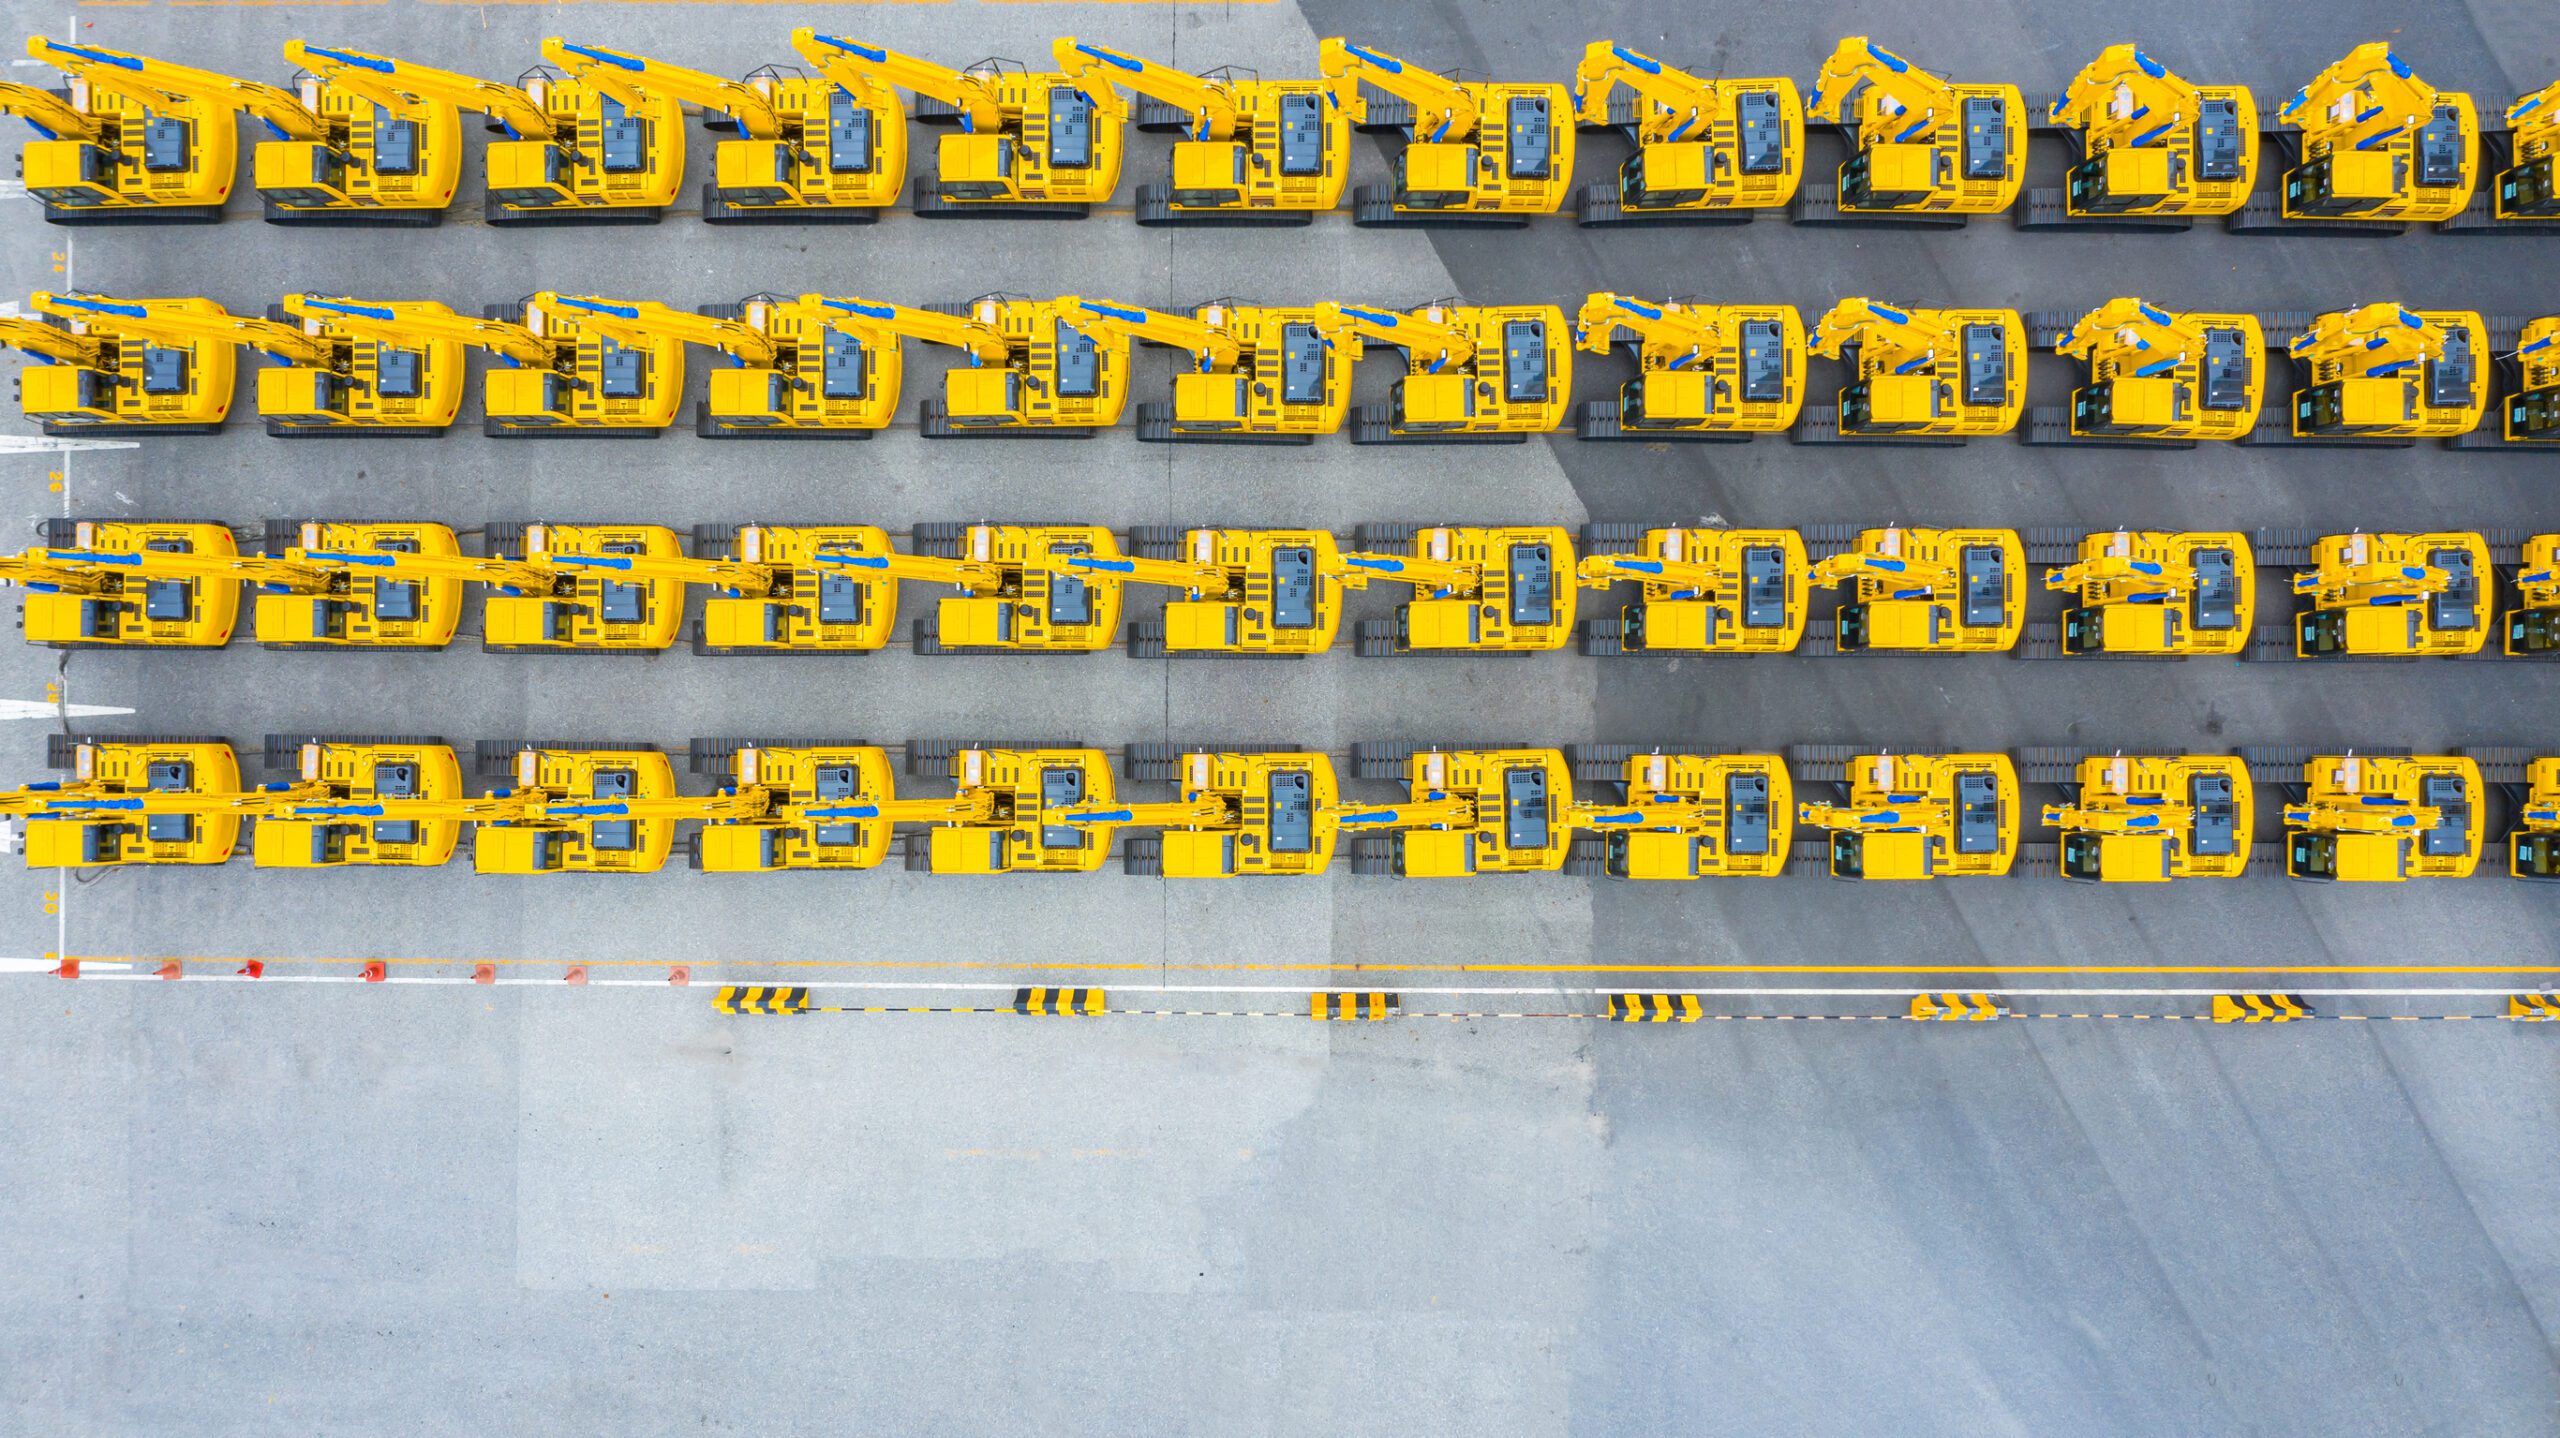 Excavator construction vehicles lined up in an aerial view to illustrate Custom Hydraulic Manifolds